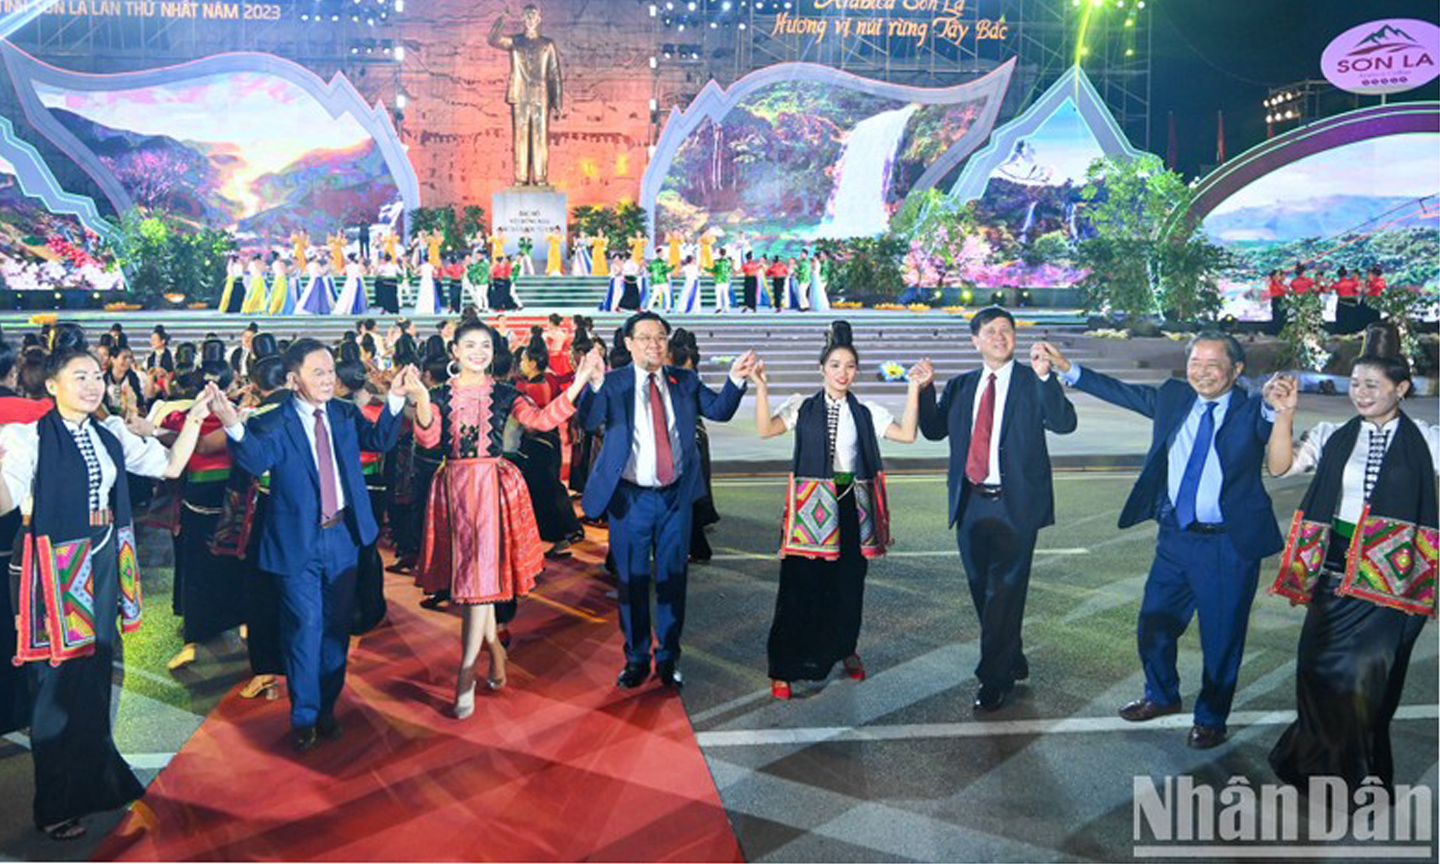 National Assembly Chairman Vuong Dinh Hue and other delegate join the xoe dance at the festival. (Photo: Duy Linh).